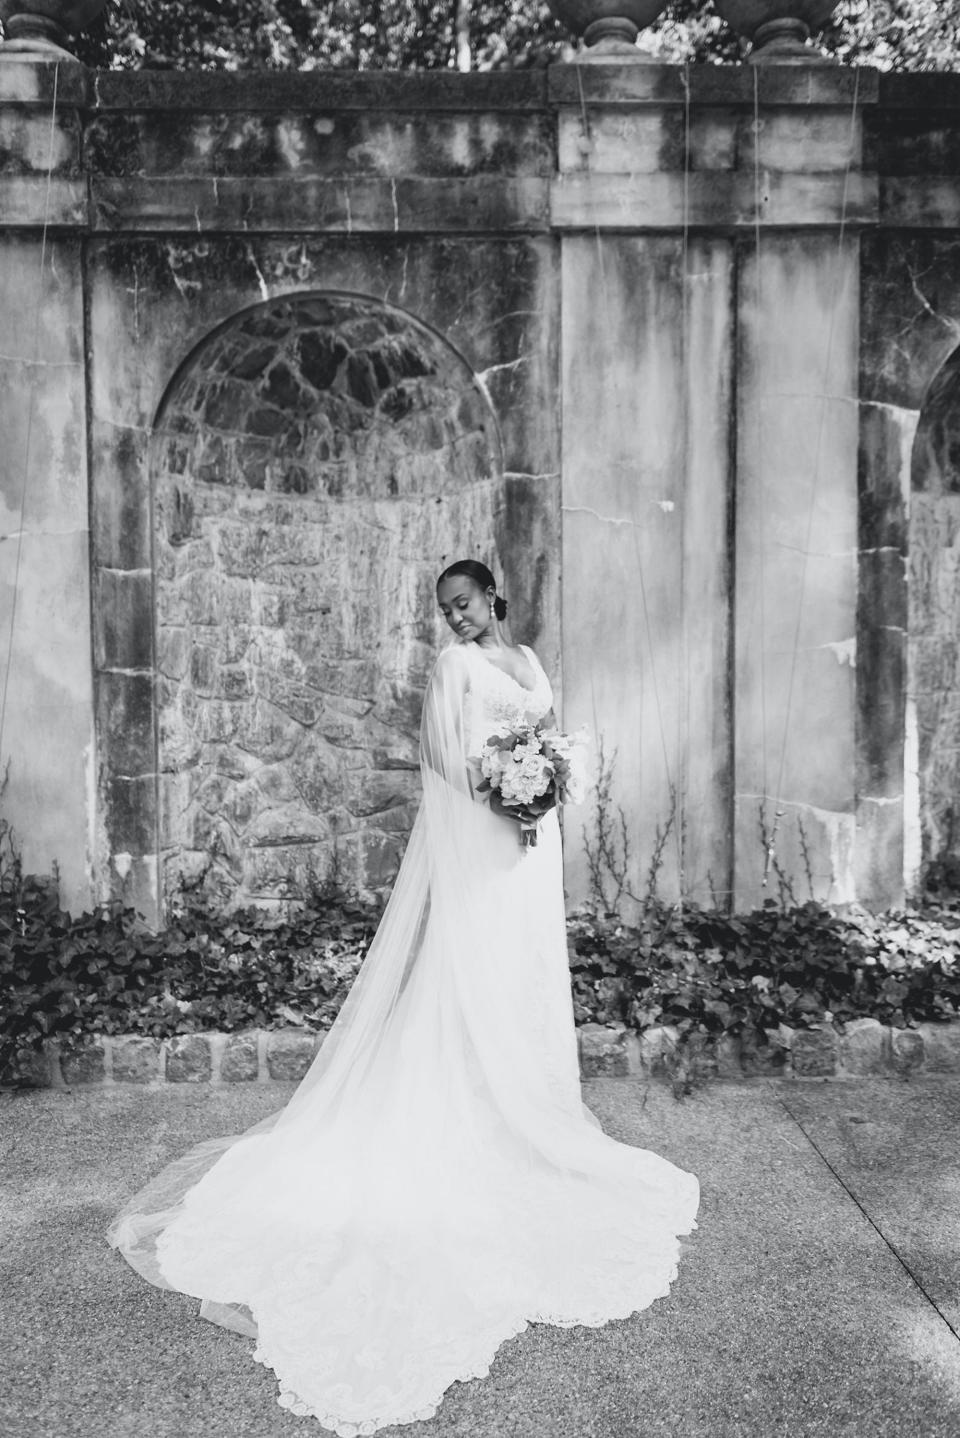 A bride poses in her wedding dress in a black and white photo.